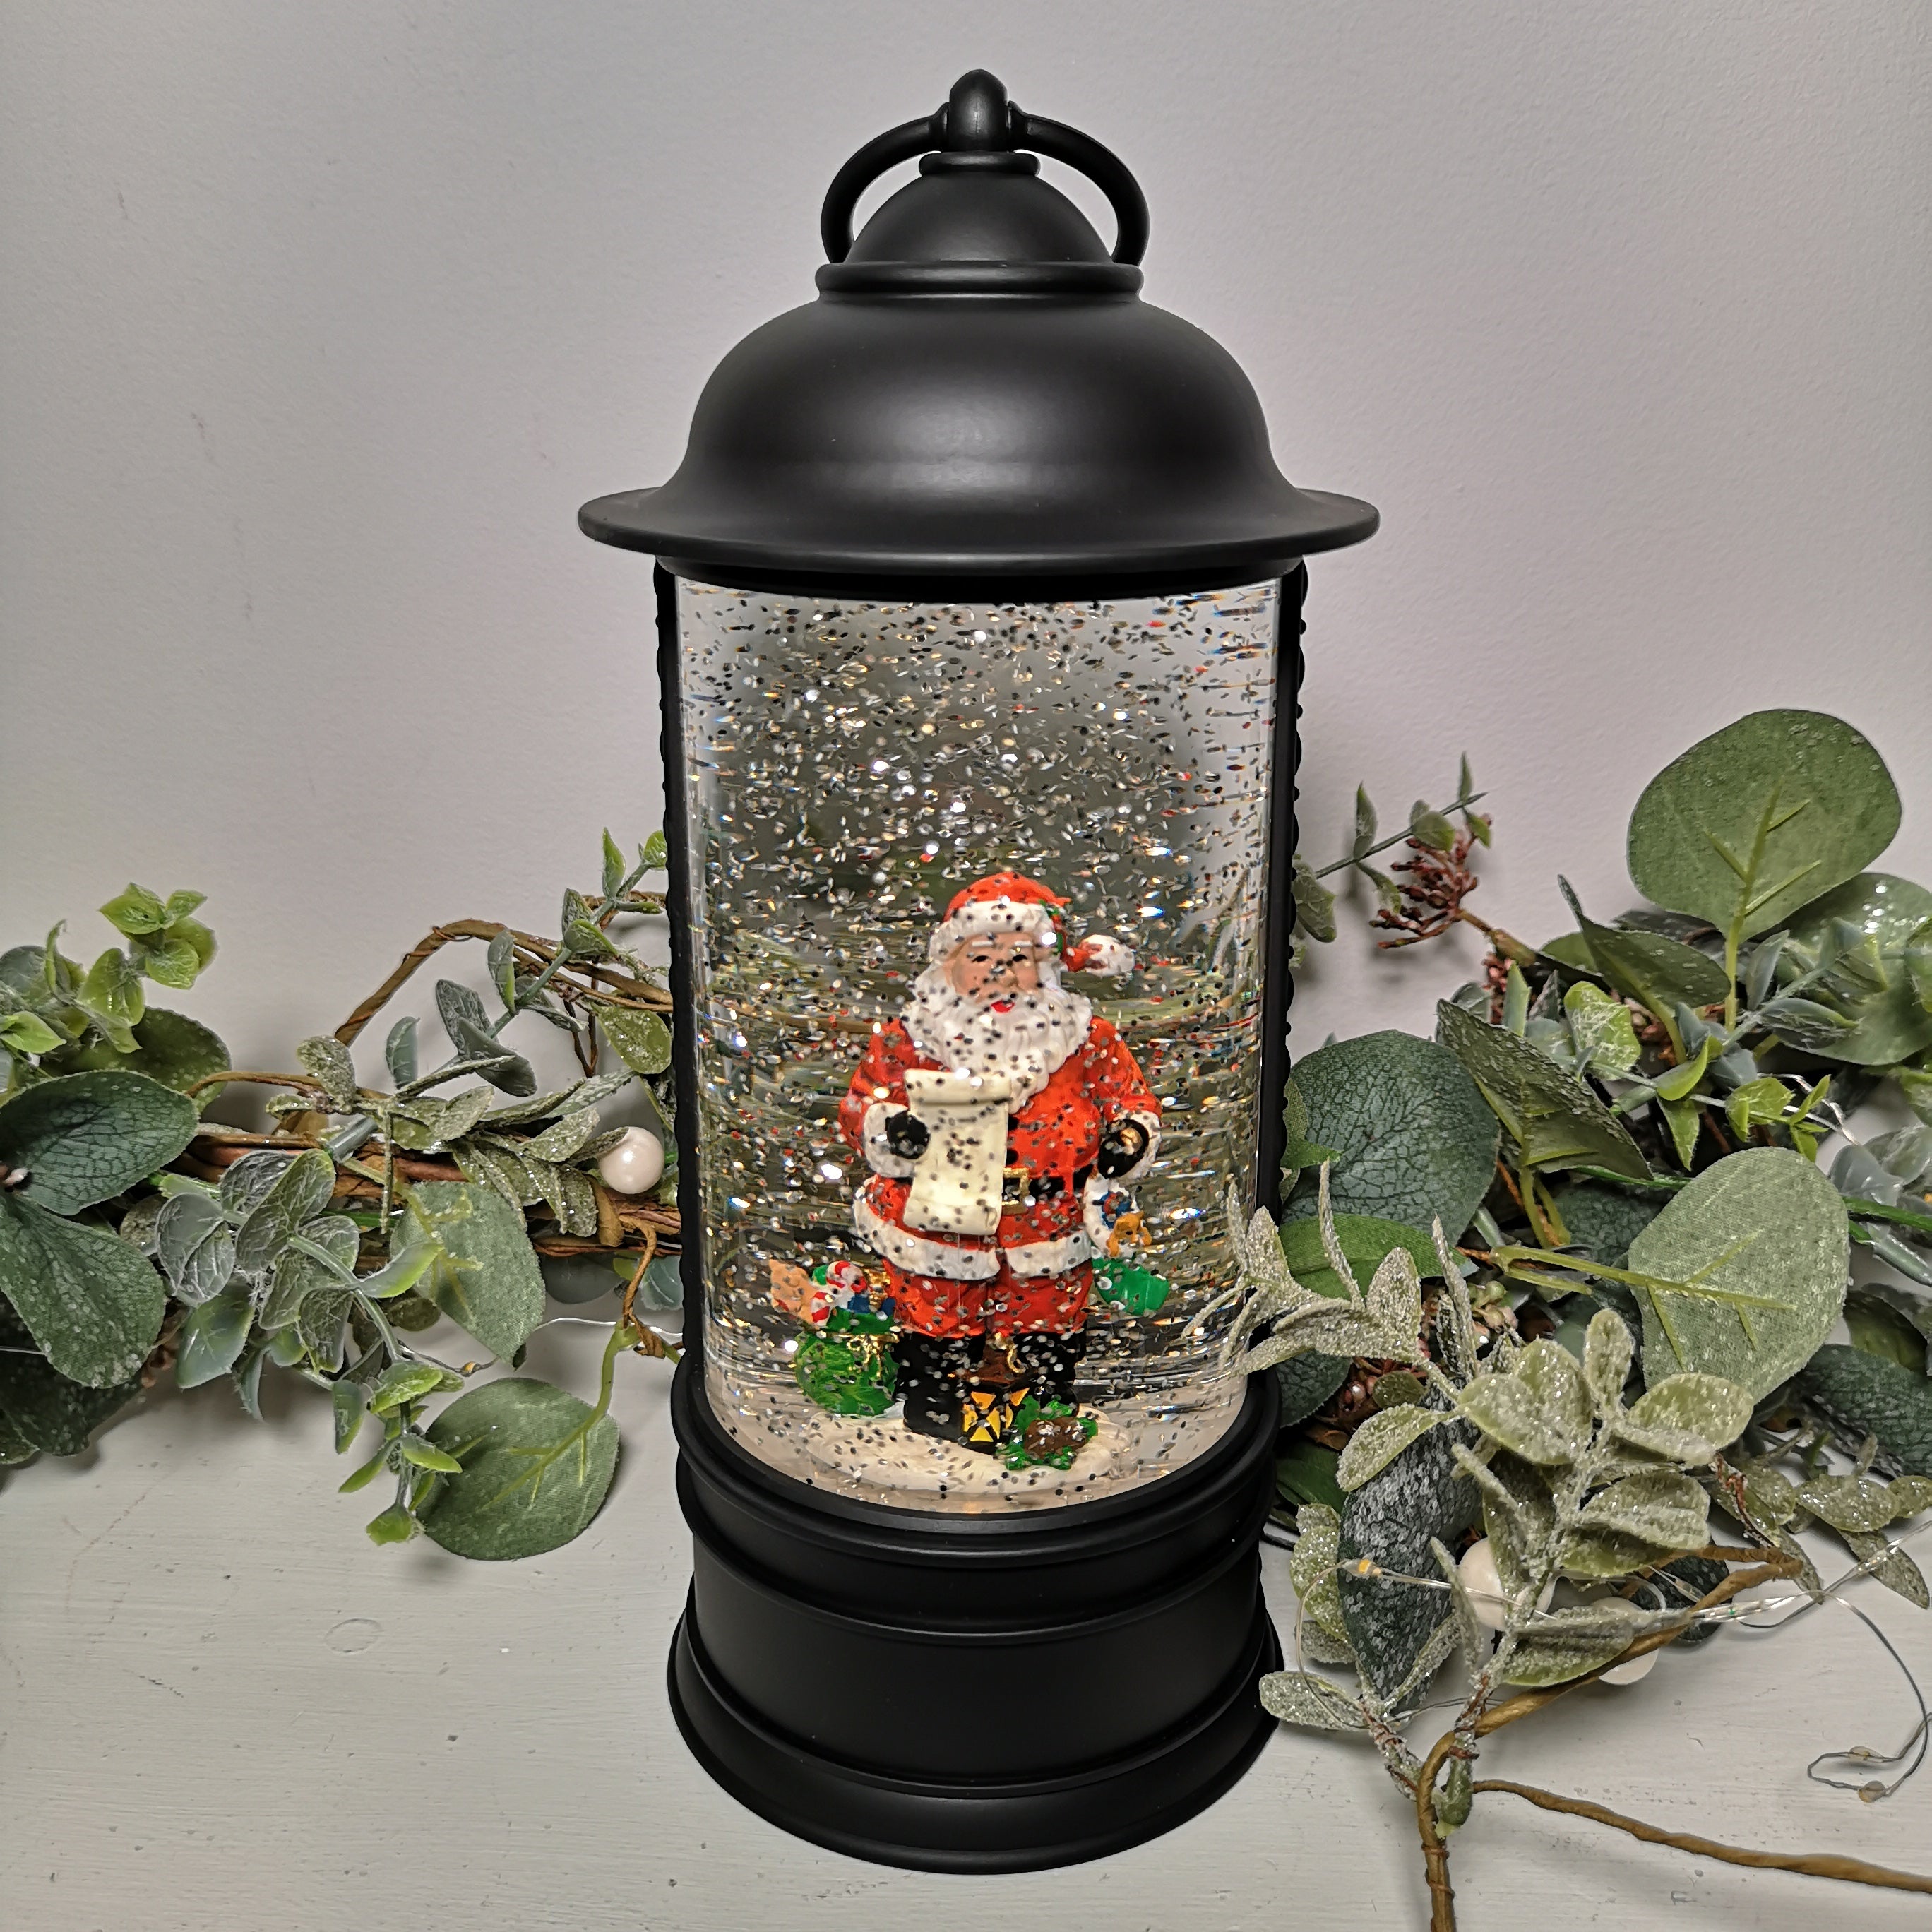 29cm Snowtime Christmas Water Spinner Antique Effect Lantern With Santa Scene  Dual Power